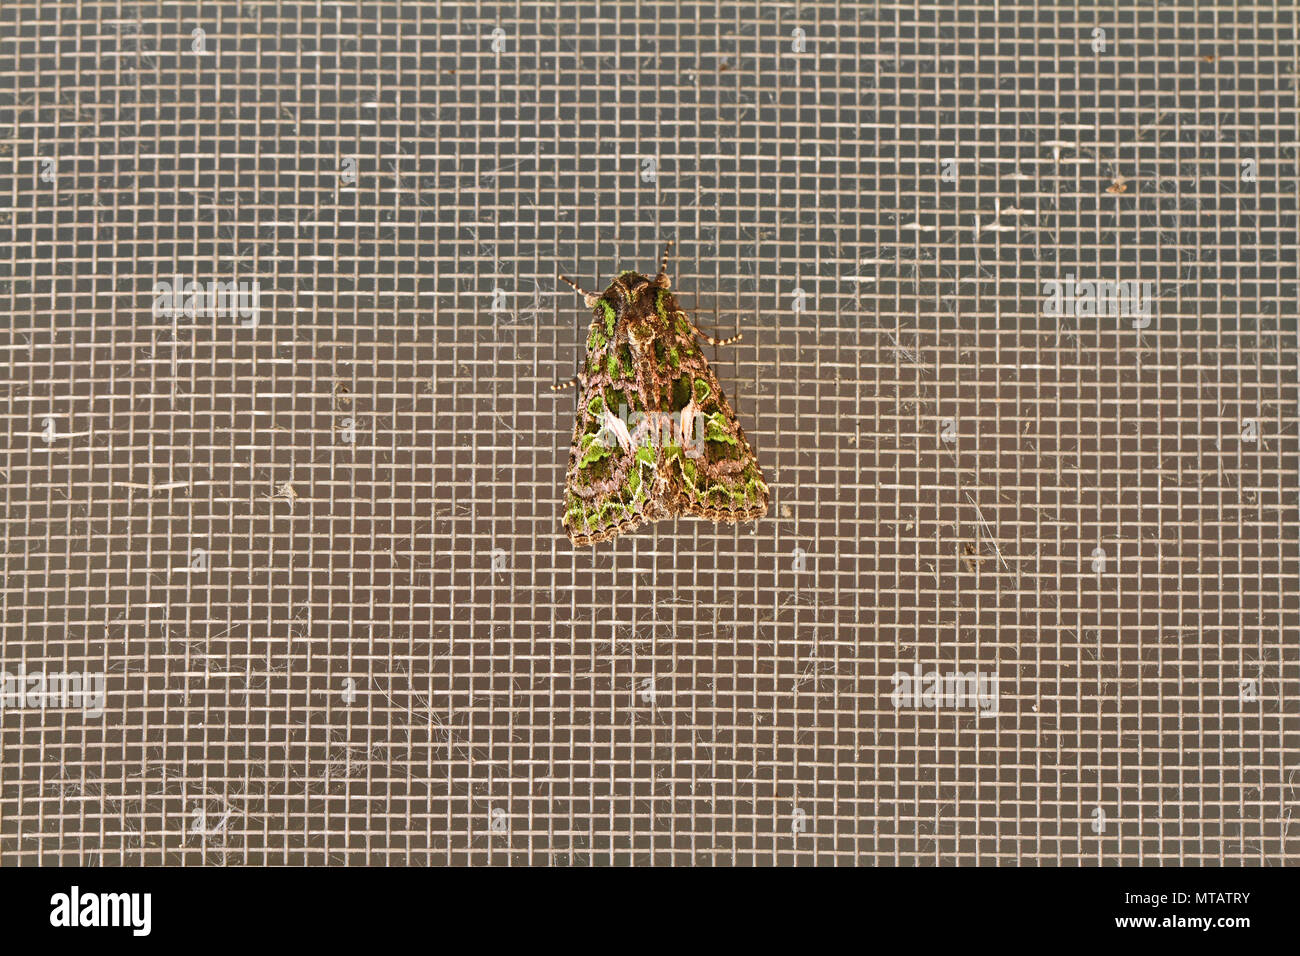 orache moth Latin trachea atriplicis a type of noctuid moth at rest on a screen door in Italy a continental moth rarely seen in mainland Britain Stock Photo